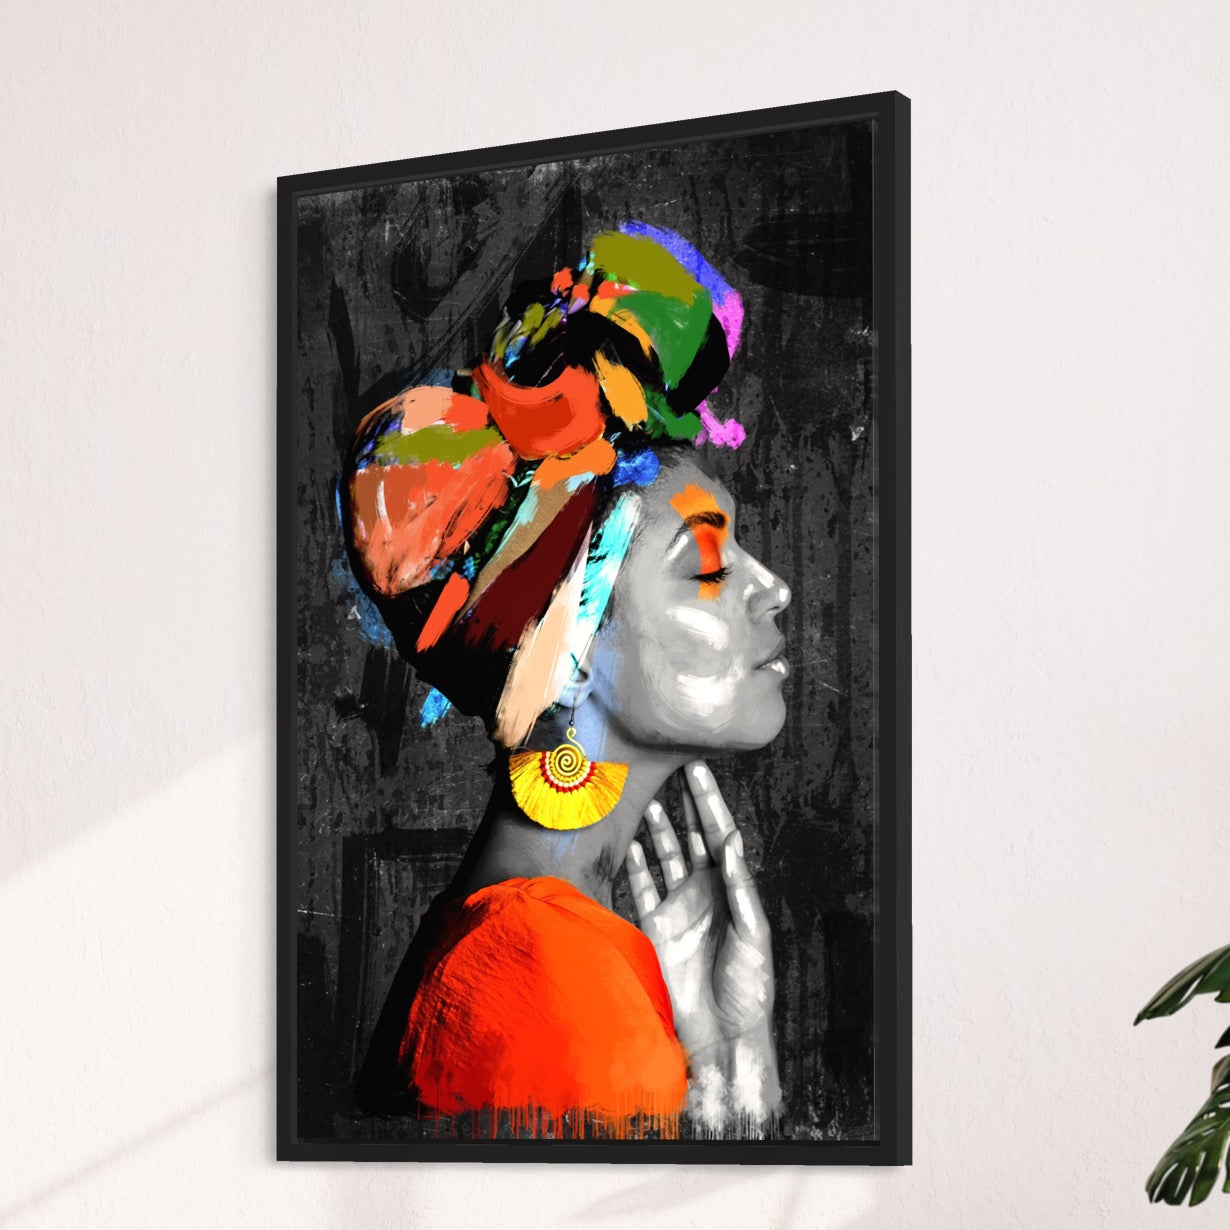 Harmony Embodied | Canvas Reflecting Woman's Inner Peace